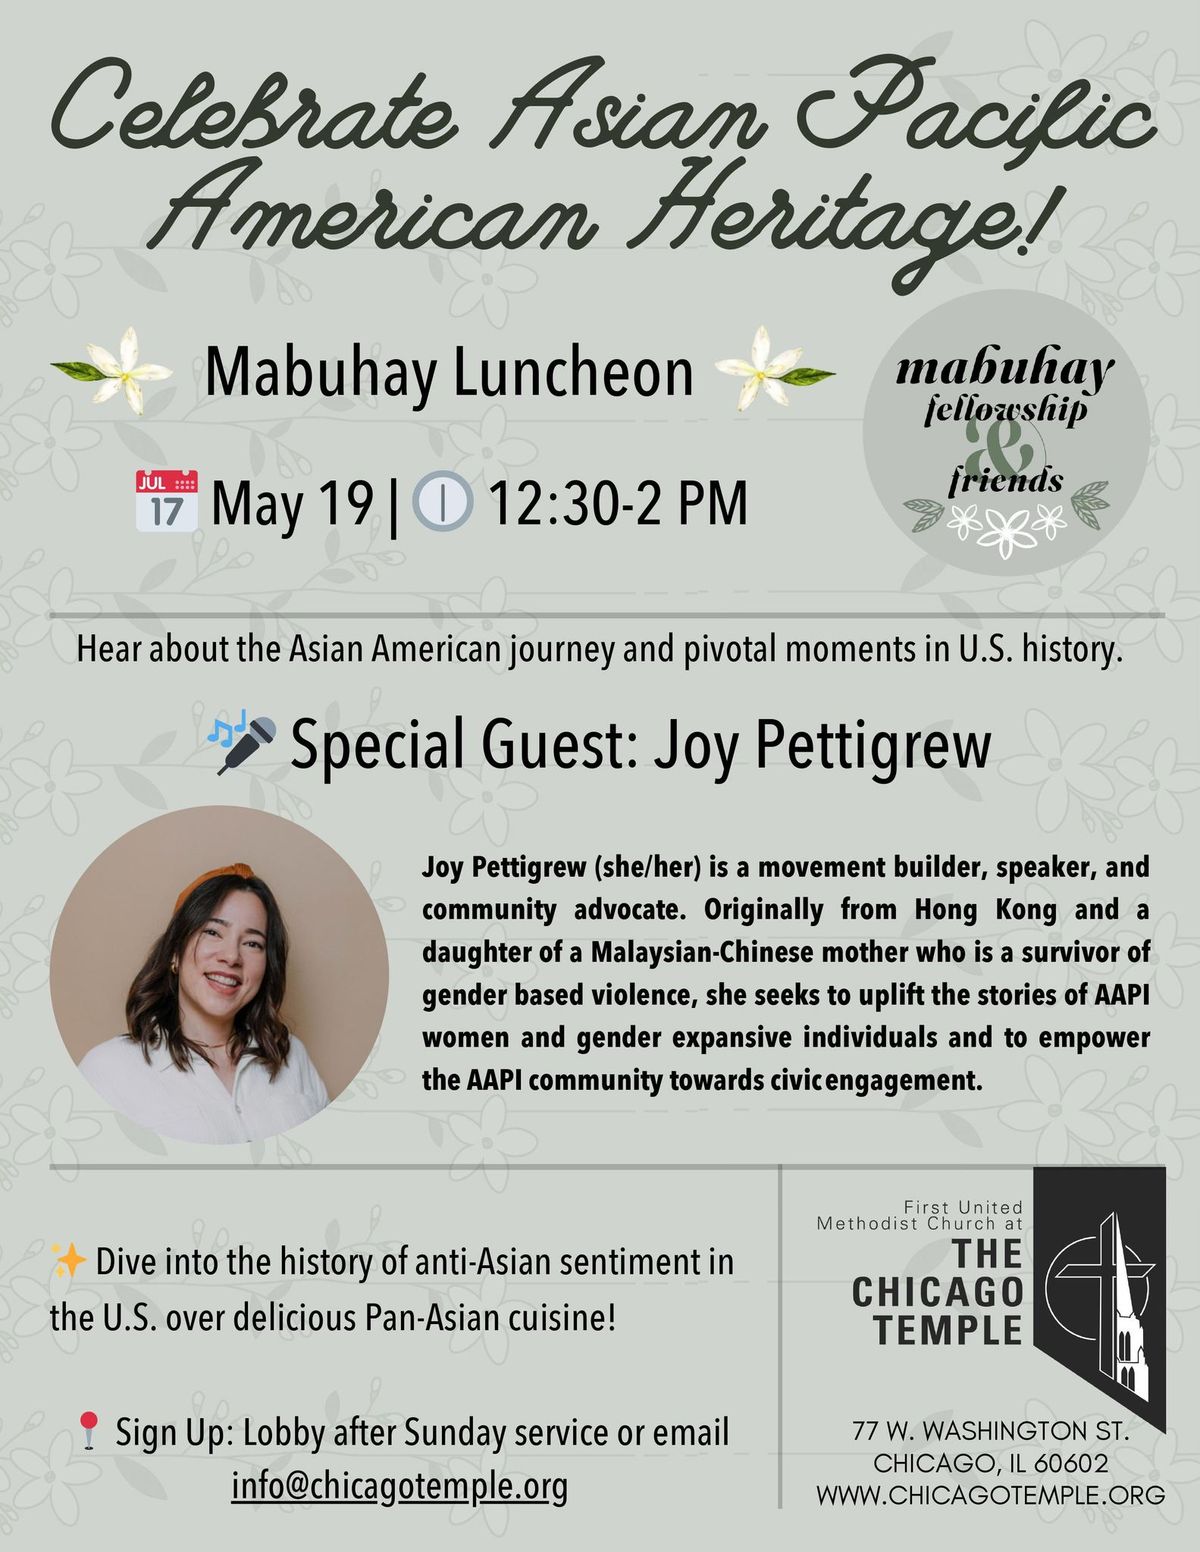 Mabuhay Luncheon with a Lecture